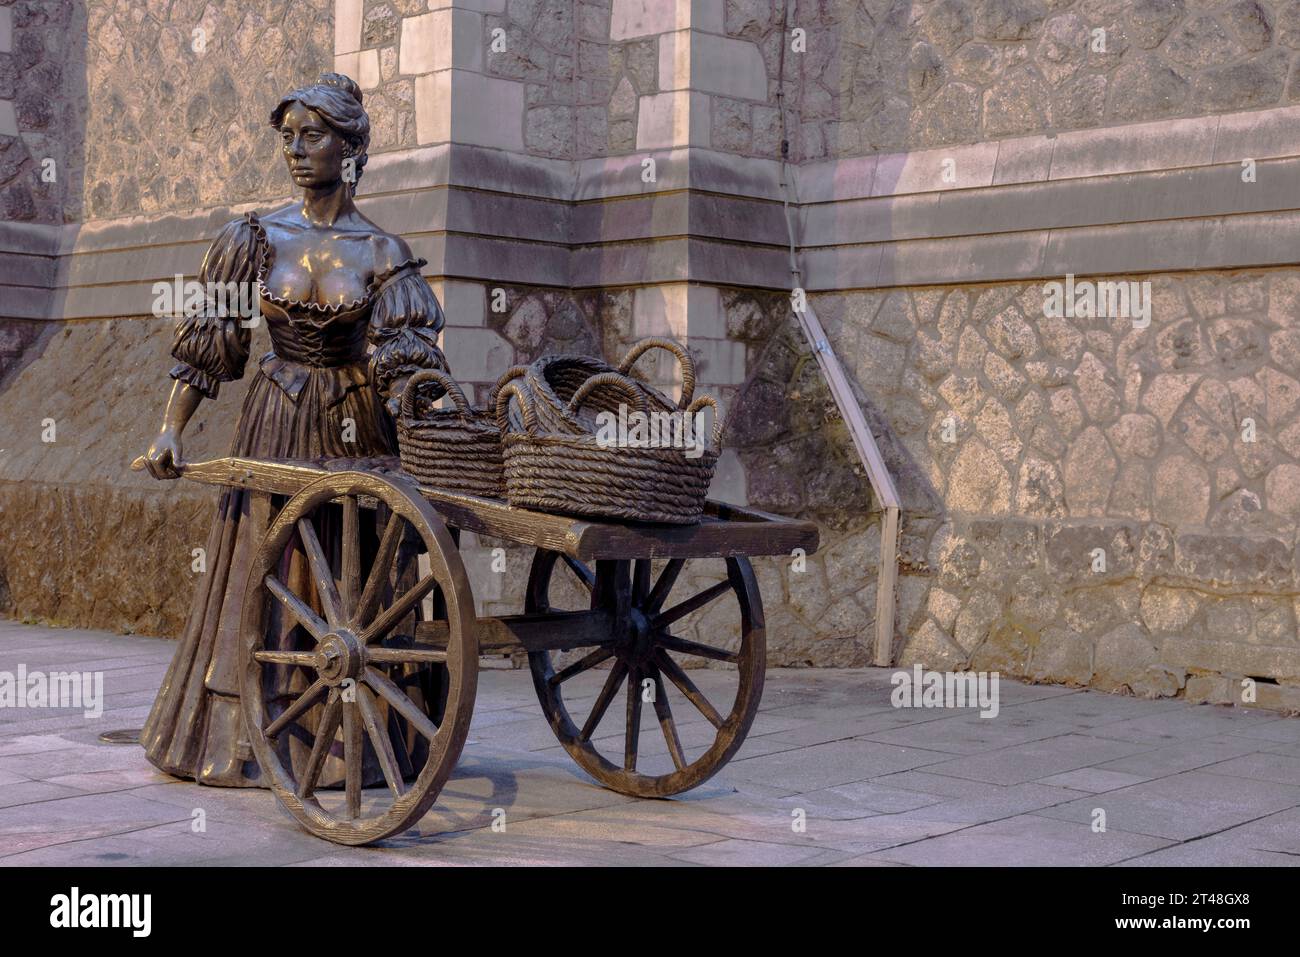 The Molly Malone Statue is a bronze statue of a young woman selling cockles and mussels on Grafton Street in Dublin, Ireland. Stock Photo